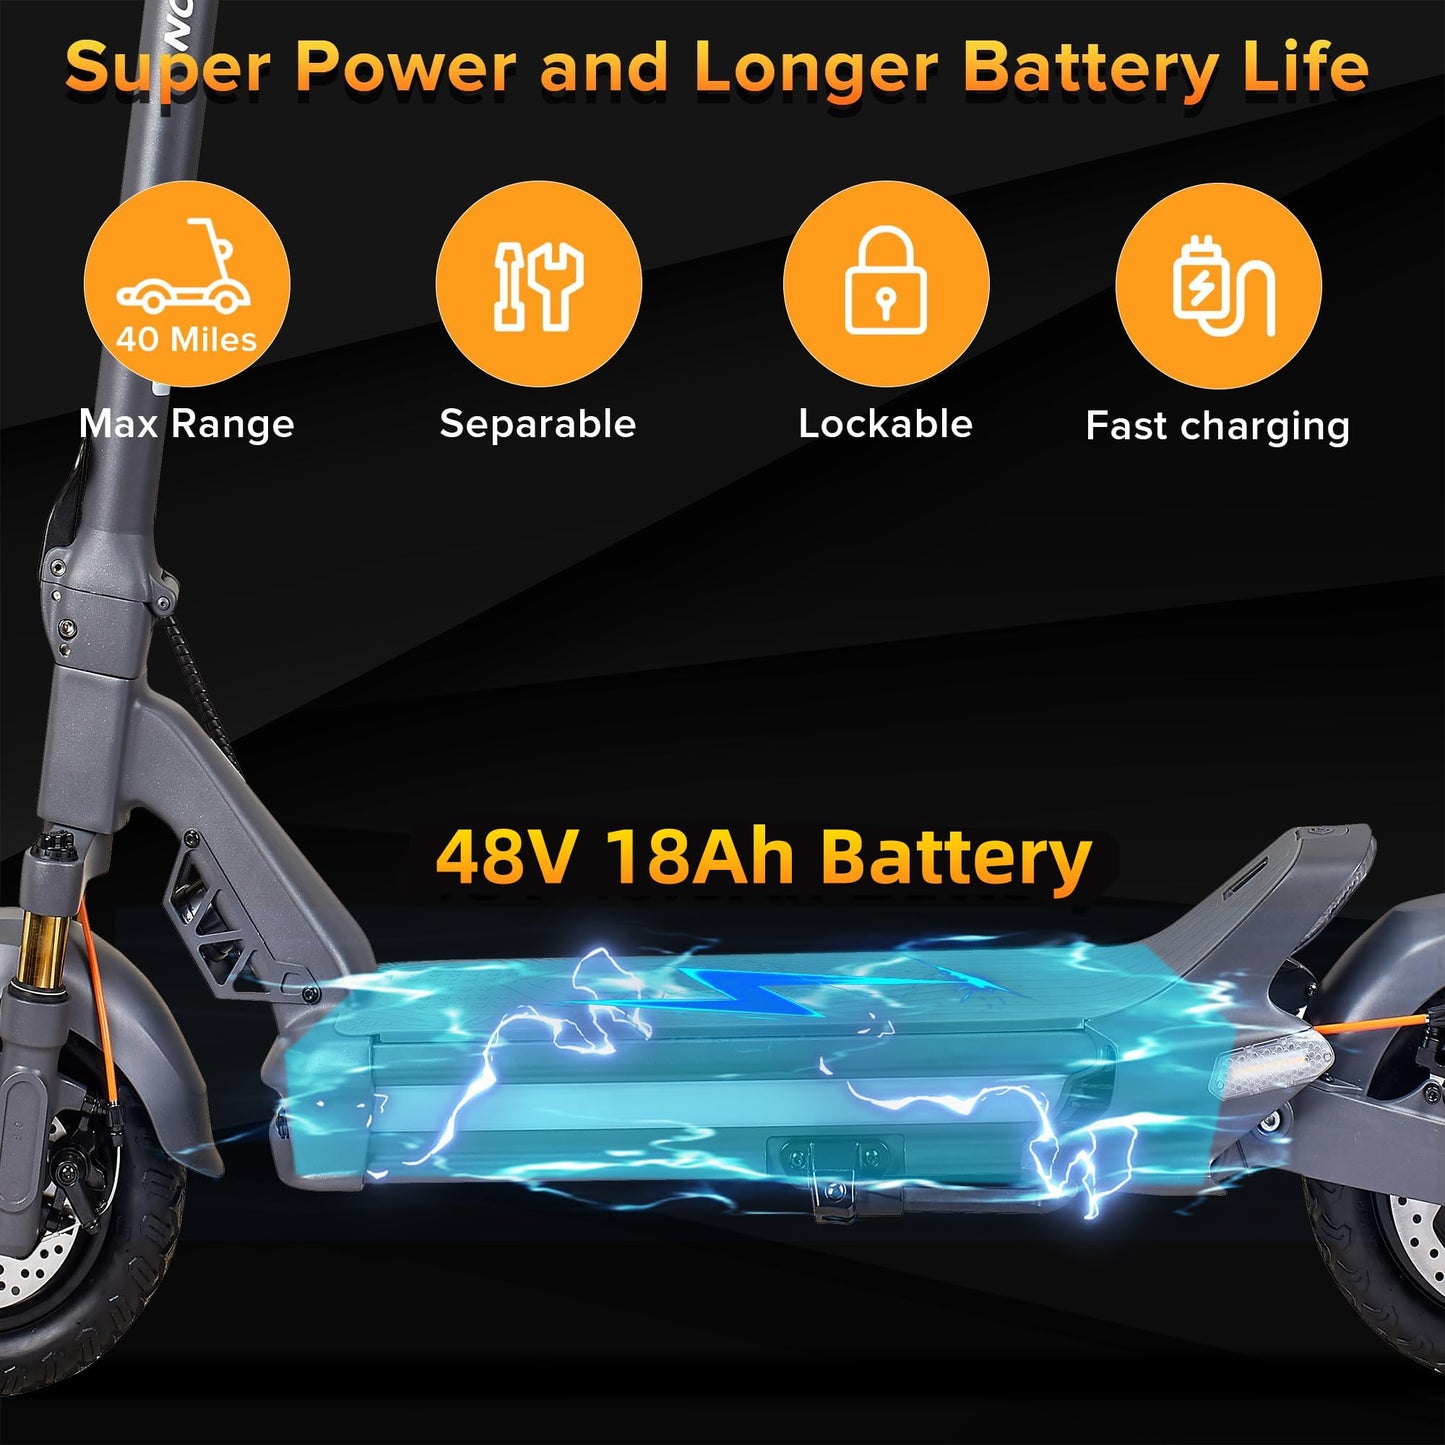 CUNFON Electric Scooter Adults, Up to 31MPH, 50 Miles Long Range, 1200W Motor Dual Disc Brakes with EABS, Damping Adjustable Full Suspensions E-Scooter with APP/Fingerprint Unlock, Black